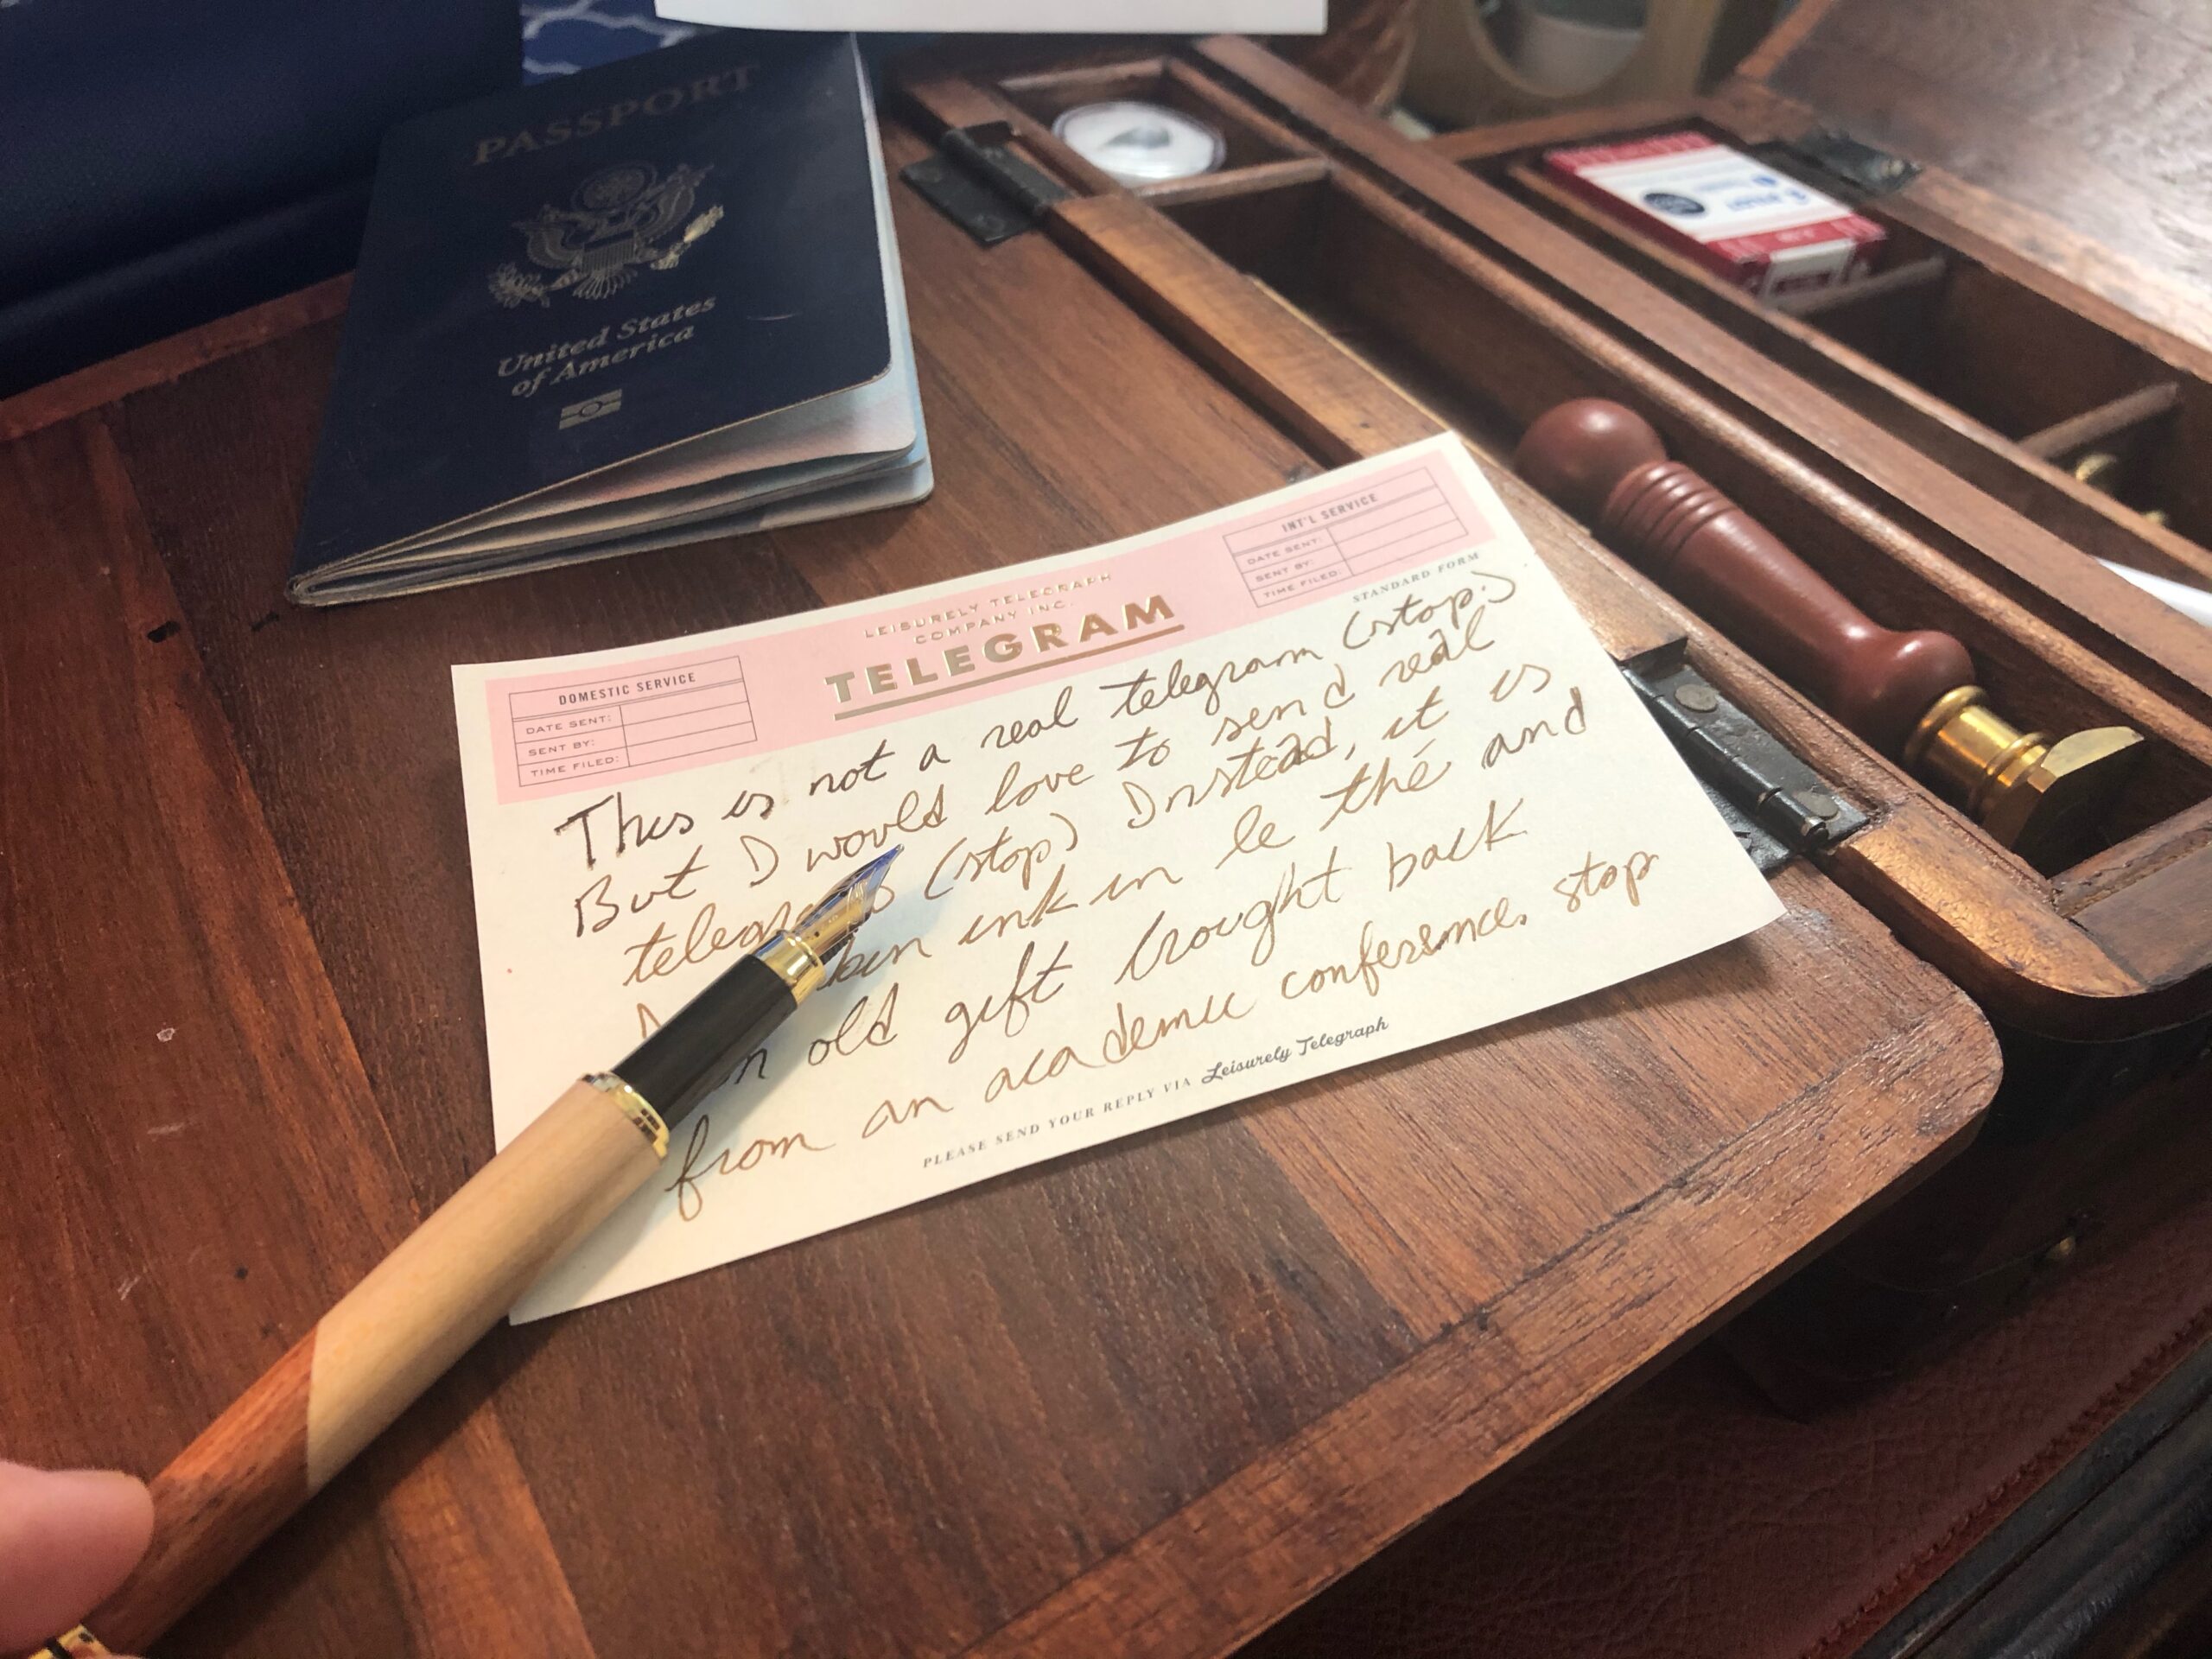 Portable Writing Desk with Passport, small note, and fountain pen.